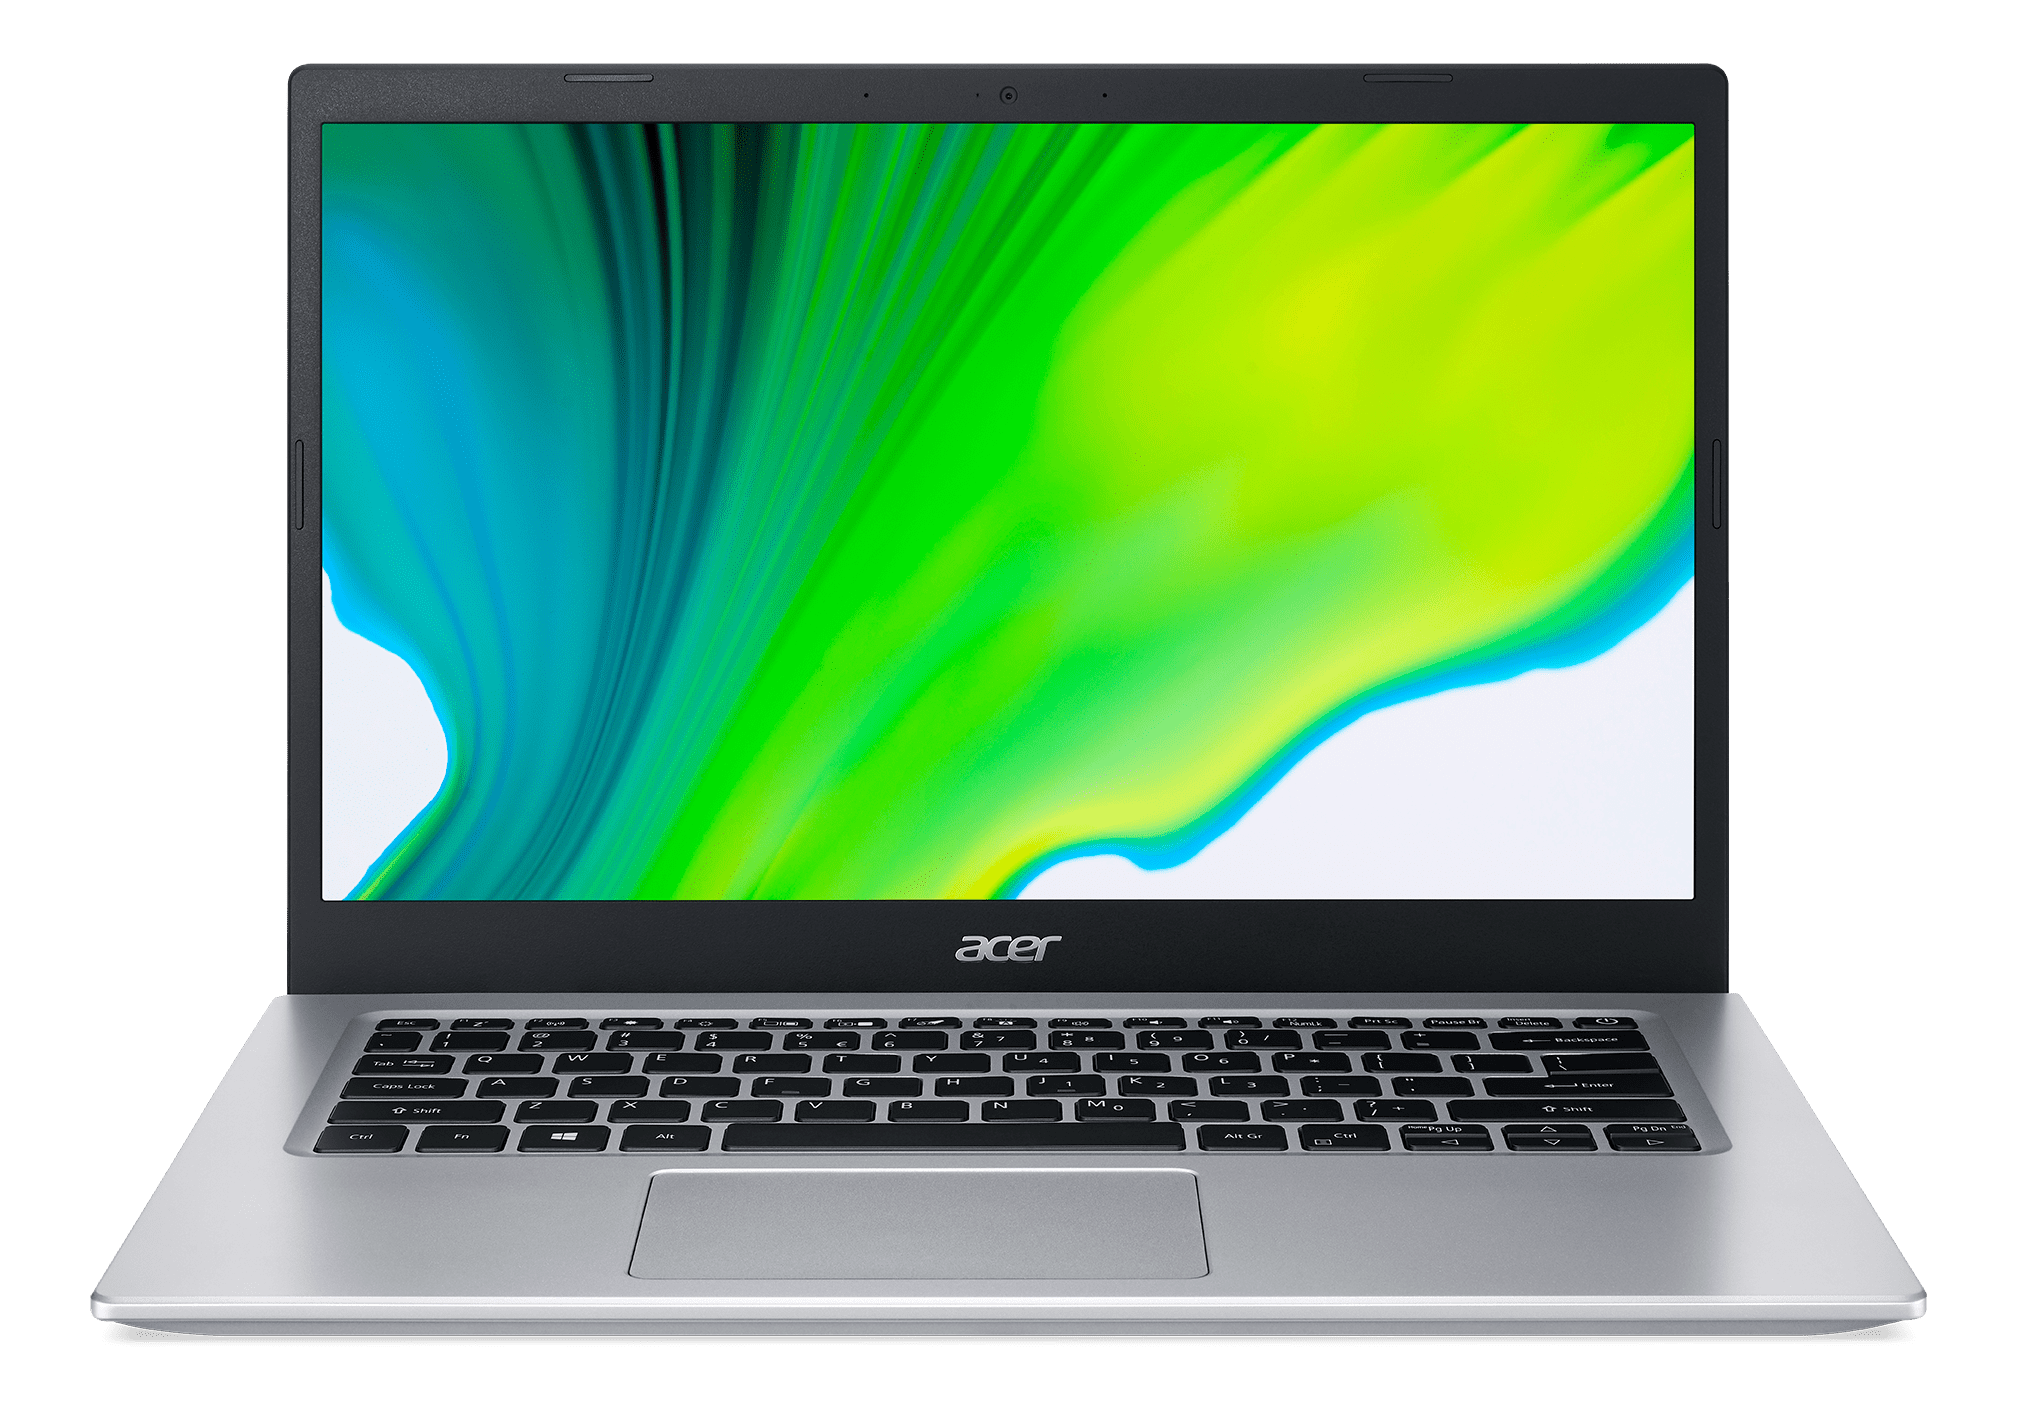 Acer Aspire 5 (2019) review: An incredible thin-and-light laptop deal - CNET